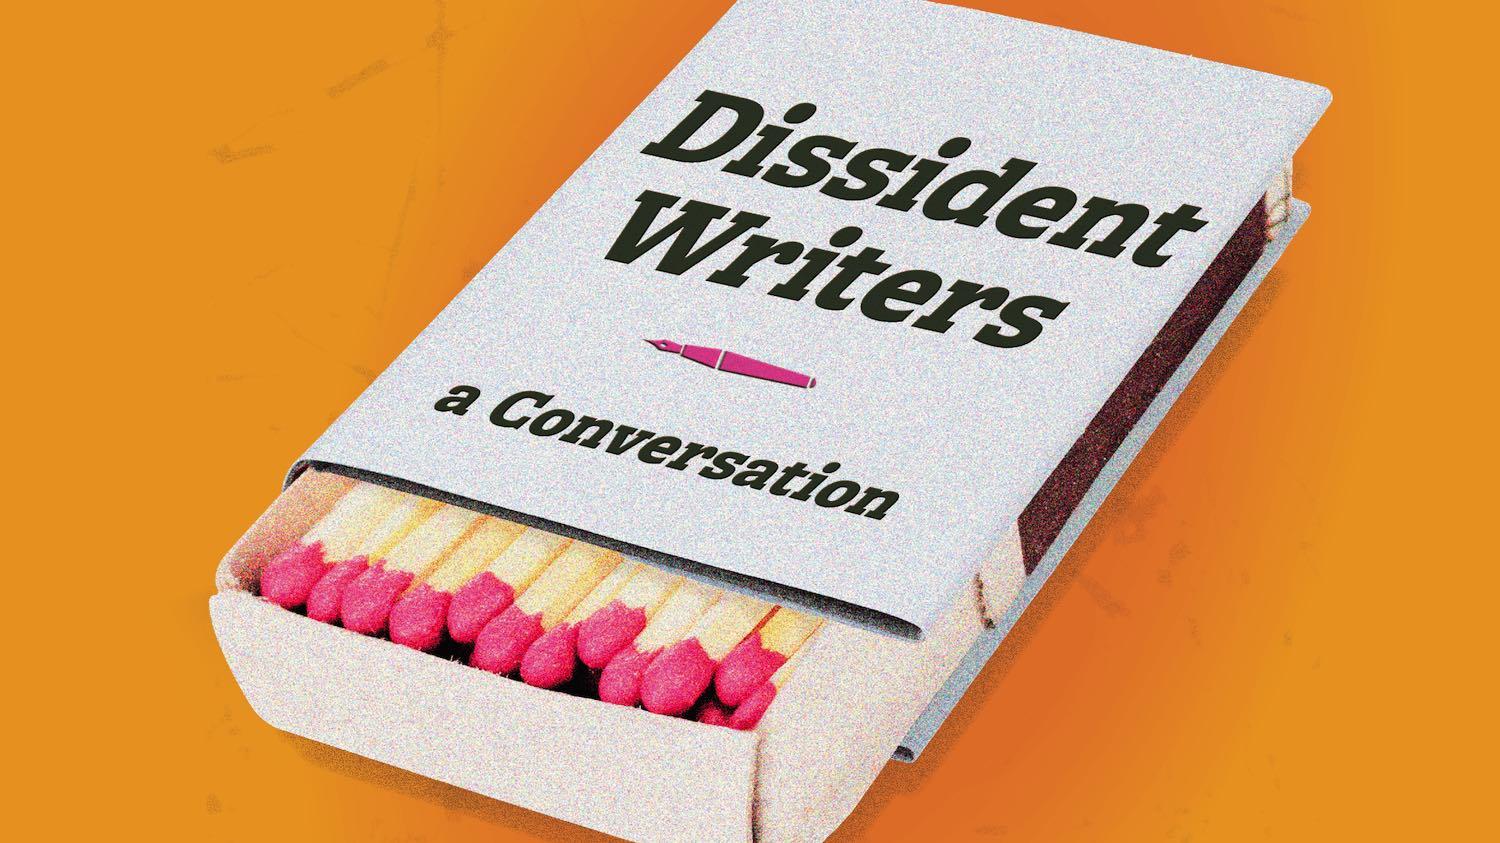 Poster image for "Dissident Writers" DVJ Event